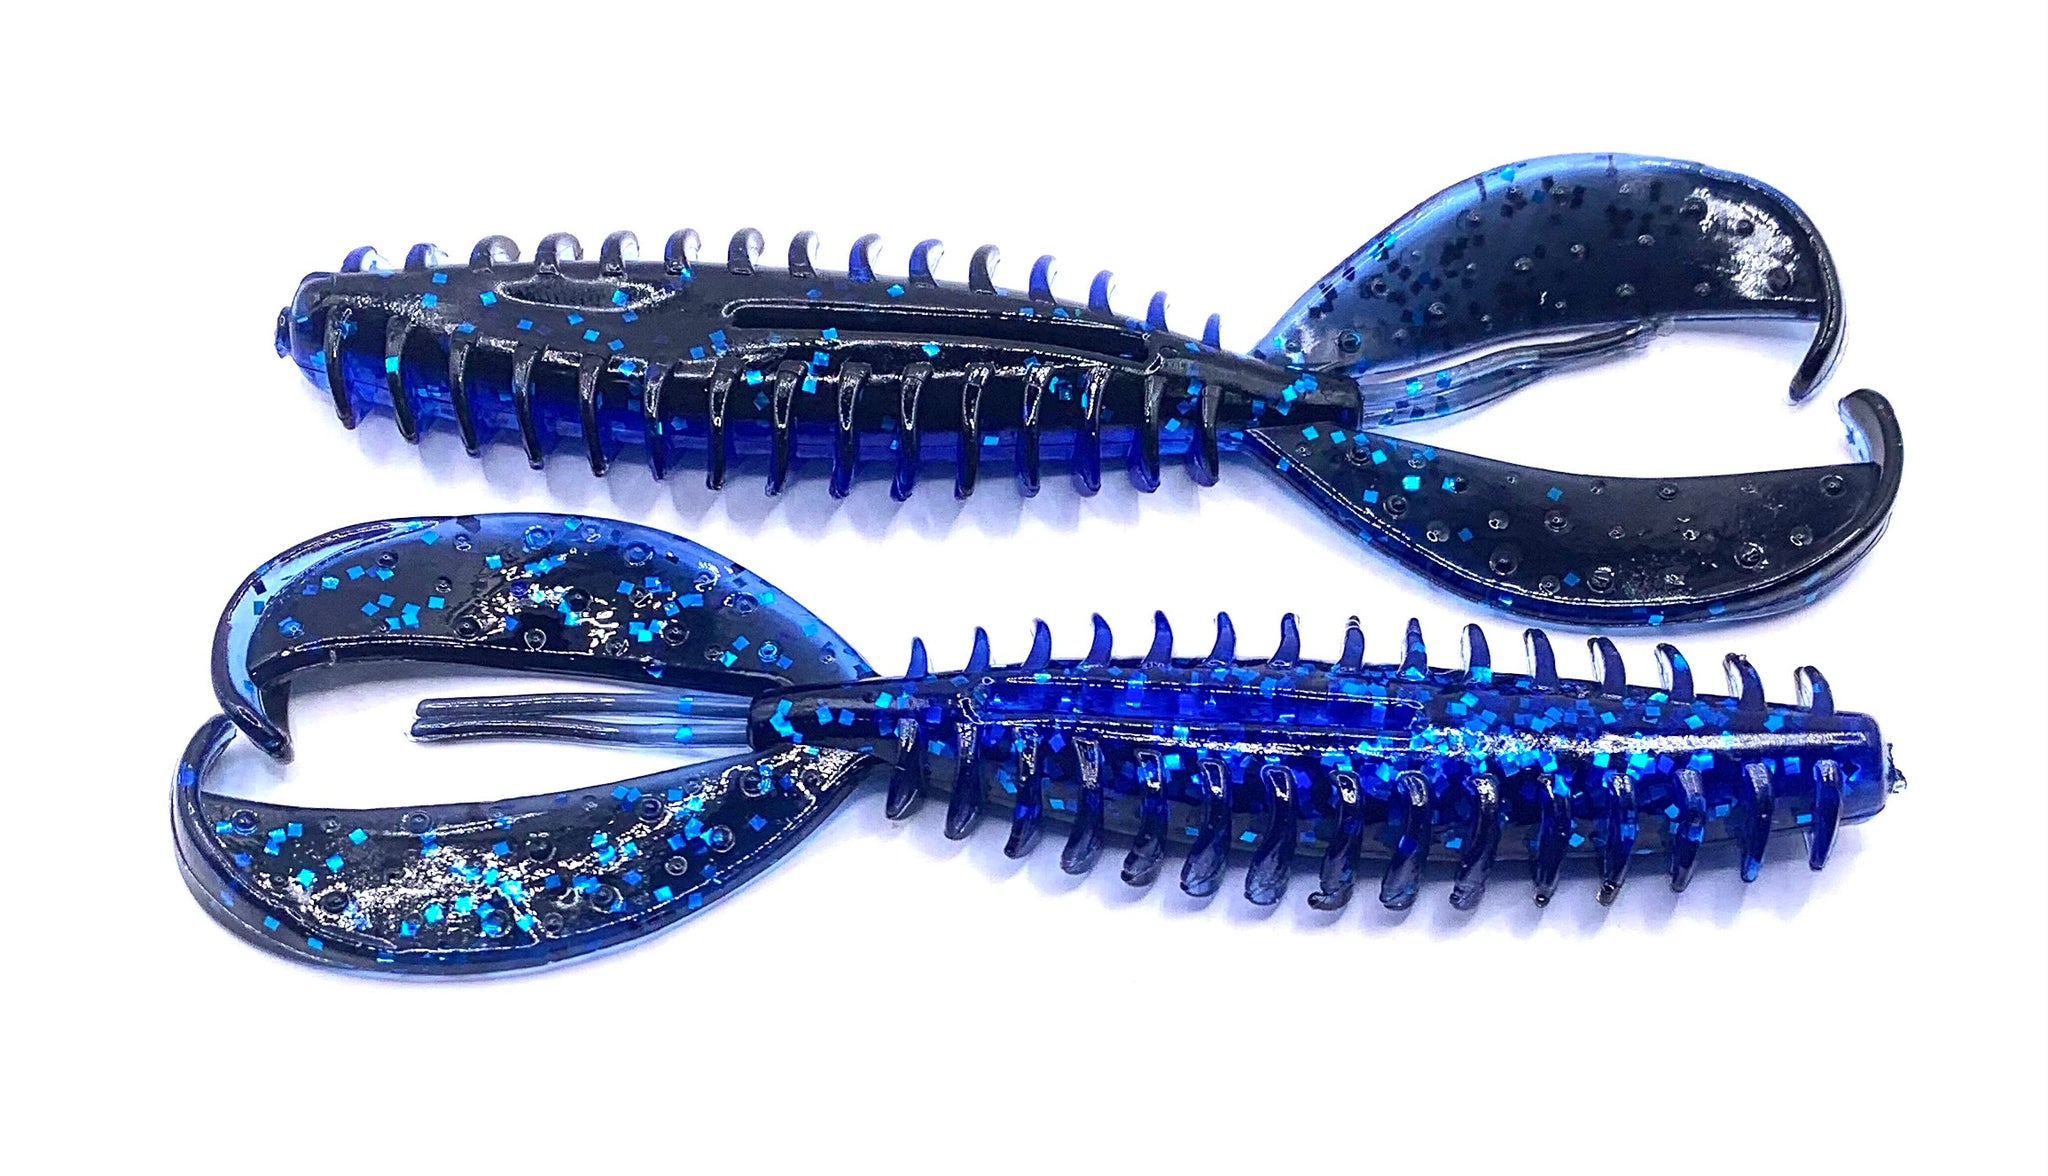 Zoom Z Craw – Clearlake Bait & Tackle